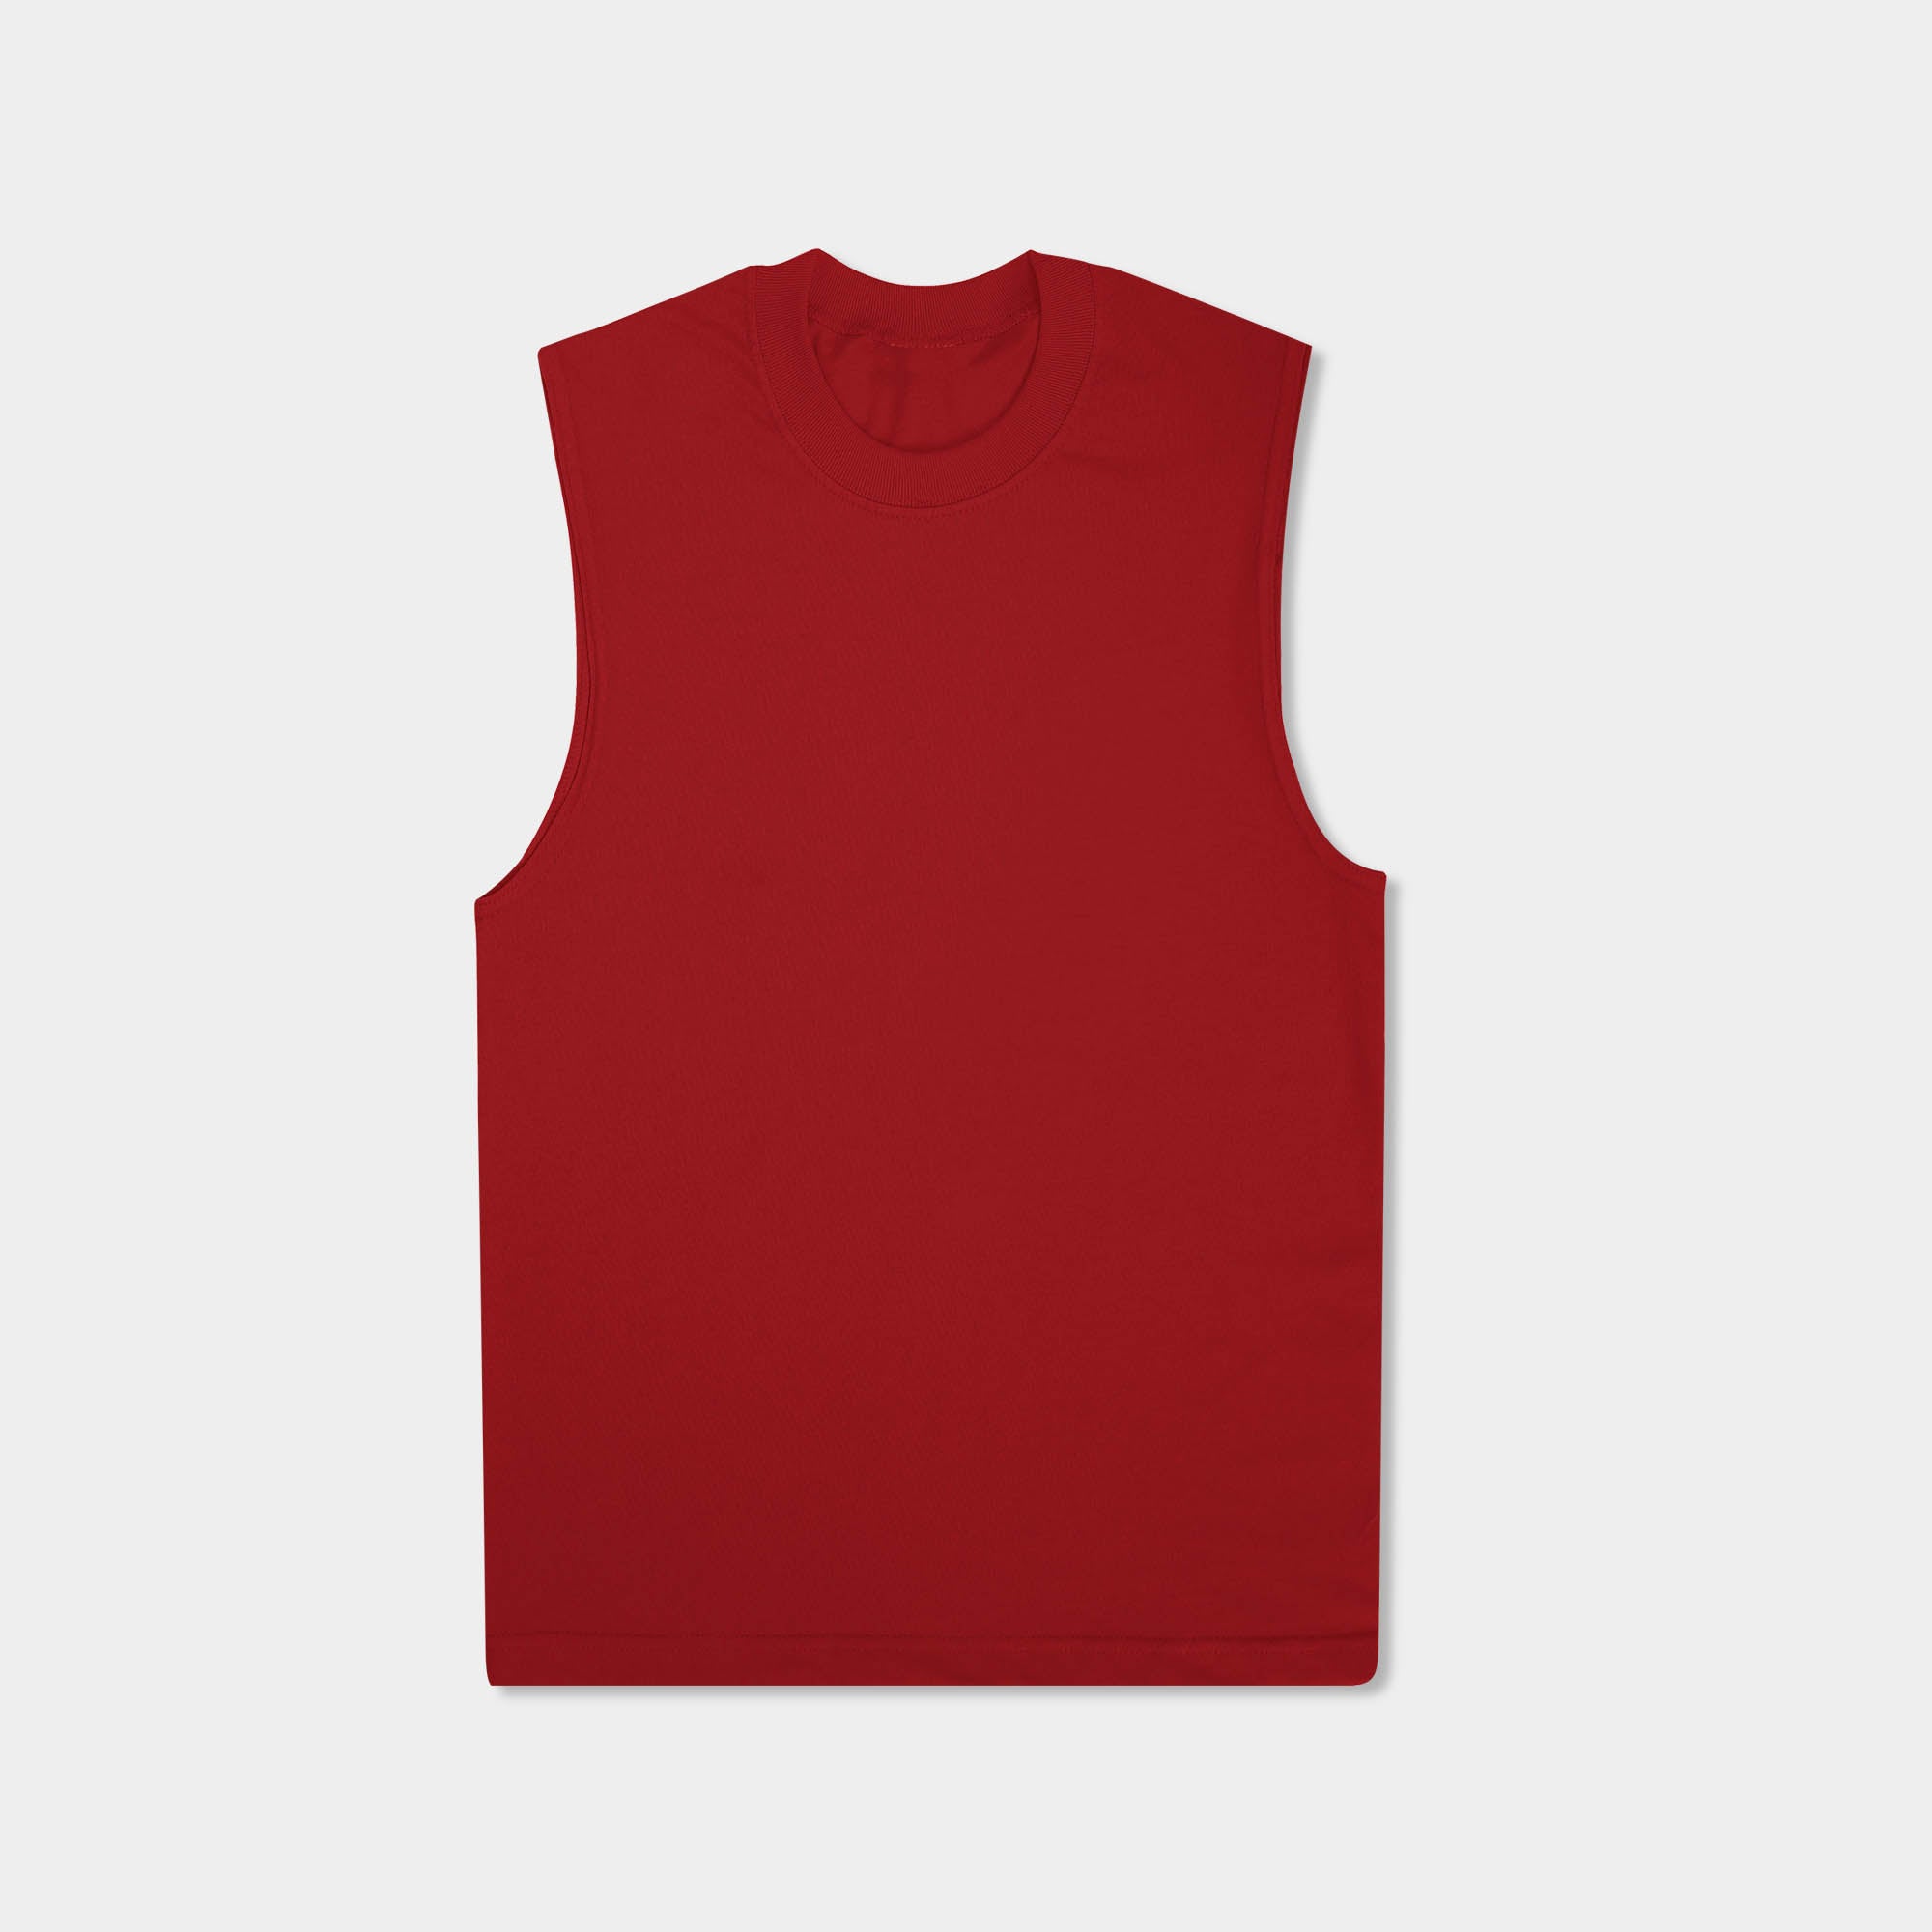 muscle tank_muscle tee_muscle tank tops_cropped muscle tank_under armour muscle shirt_insta slim tank_men muscle shirt_tank top_Red